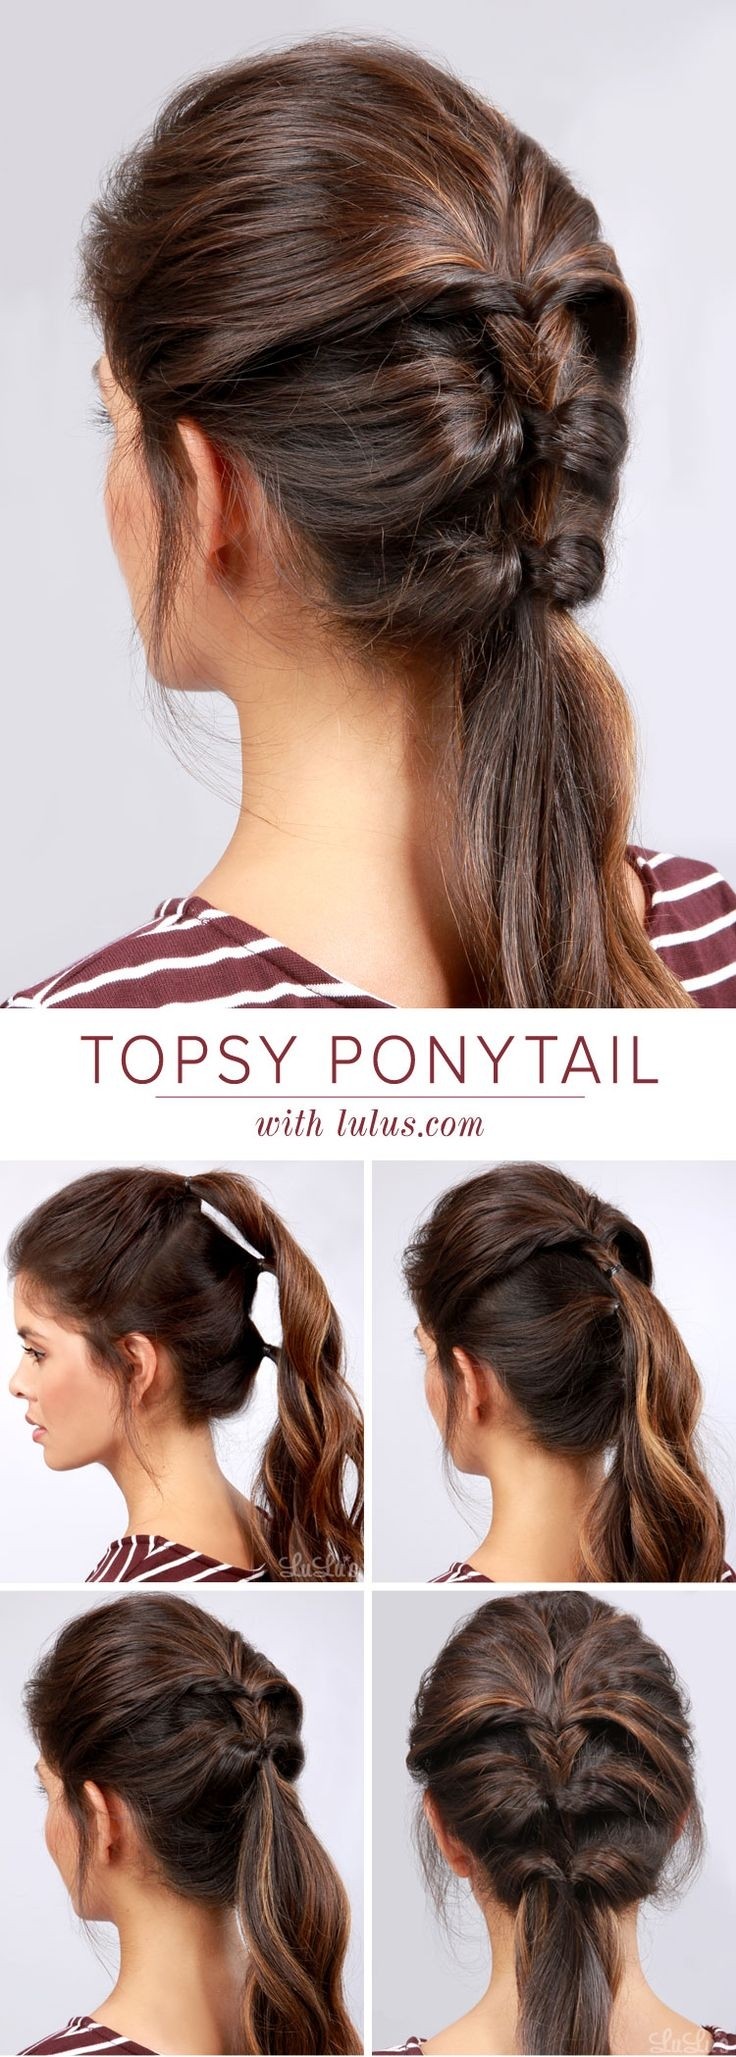 20 Ponytail Hairstyles Discover Latest Ponytail Ideas Now